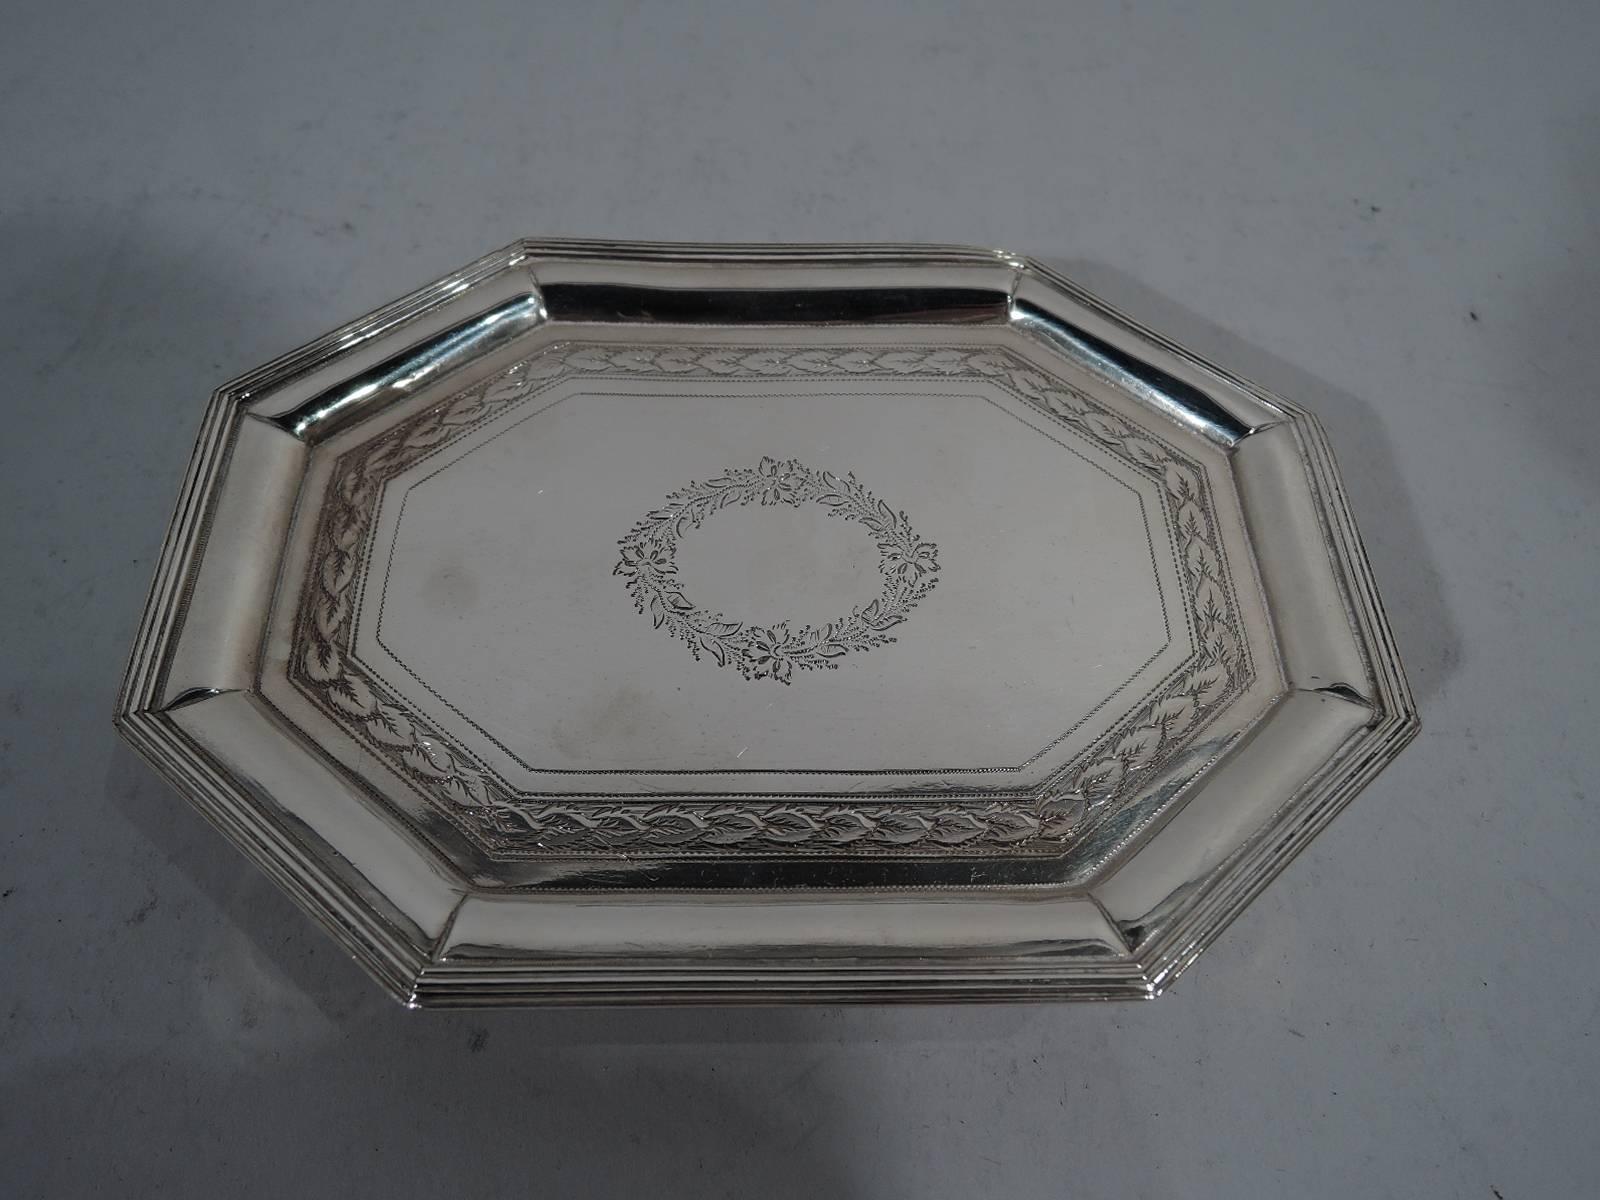 George III sterling silver salver. Made by Turner & Williams in London in 1802. Rectangular with chamfered corners and four tapering supports. Ornament engraved in well: central wreath (vacant) and imbricated leaf and pointille borders. Reeded rim.